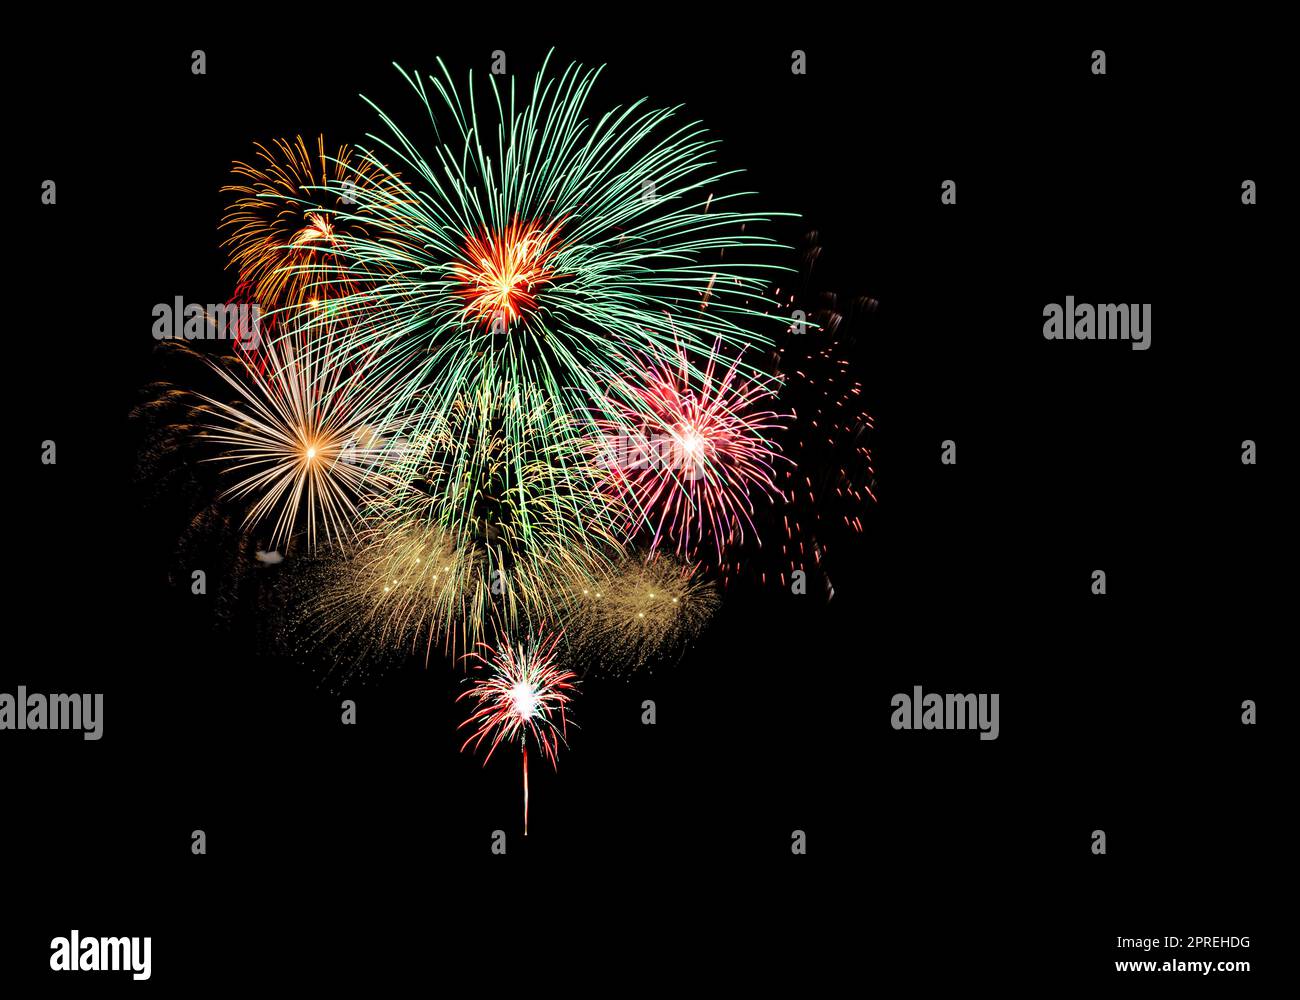 Fireworks light up the black sky with dazzling fireworks exploding display Stock Photo